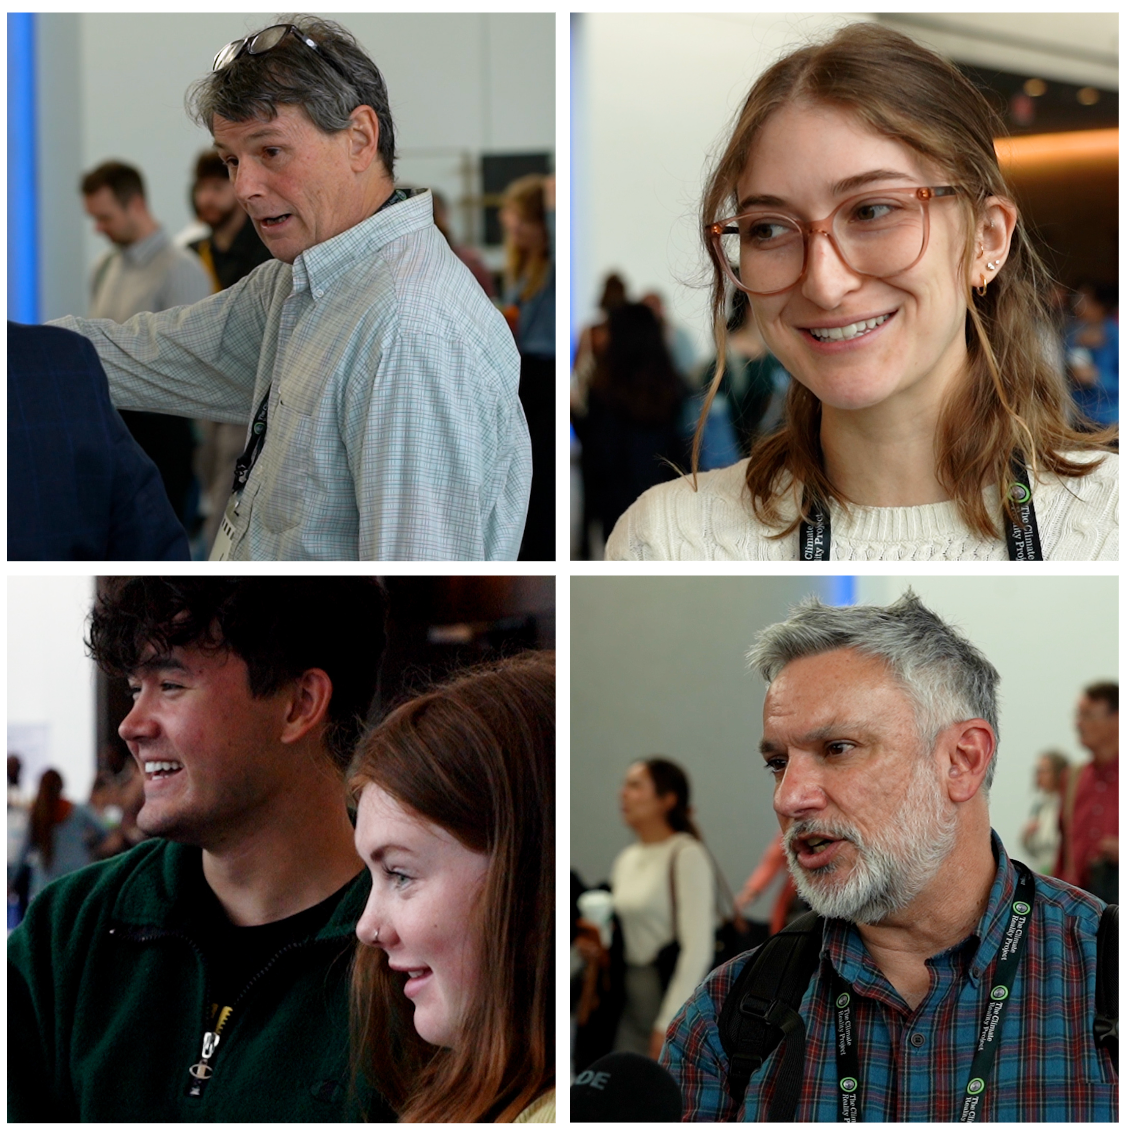 From top left, clockwise: Ed Horan, Grace Nevitt, Vikram Krishna Murthy, Ella Weber and Shiva Rajbhandari spoke to The Independent about the upcoming election at a climate leadership event in New York on Friday